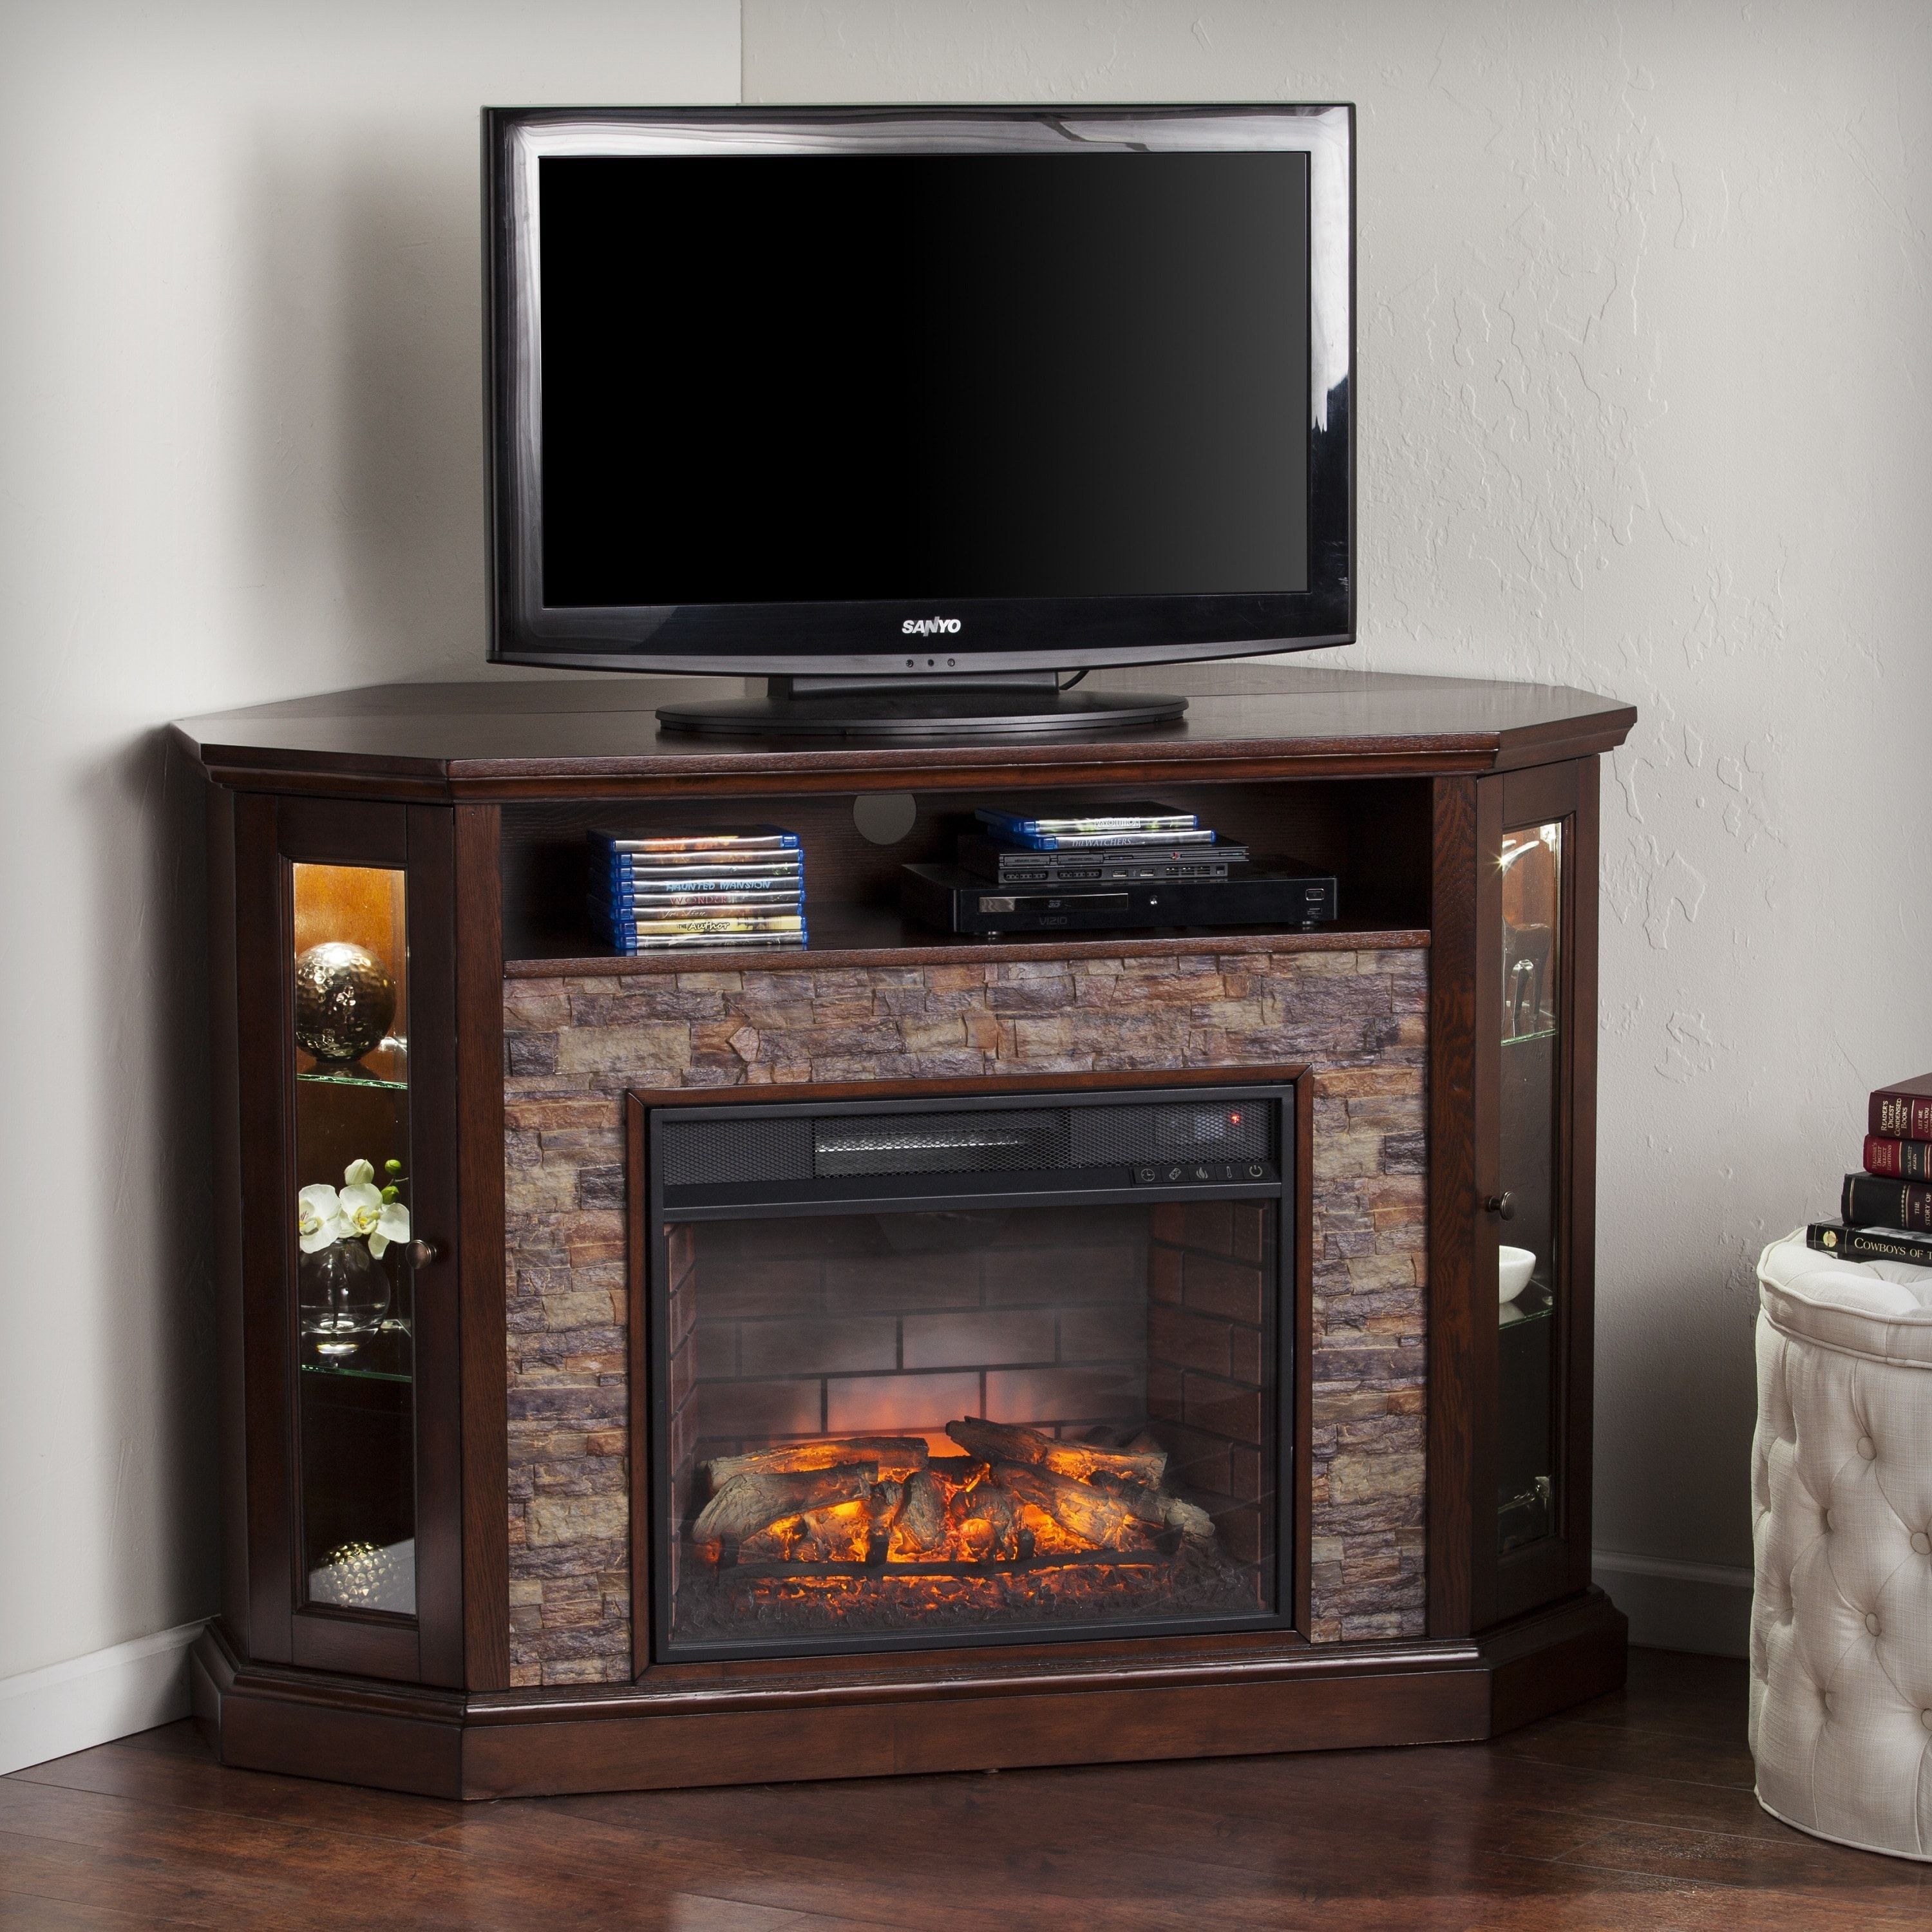 Brown Tv Stand with Fireplace New Harper Blvd Ratner Faux Stone Corner Convertible Infrared